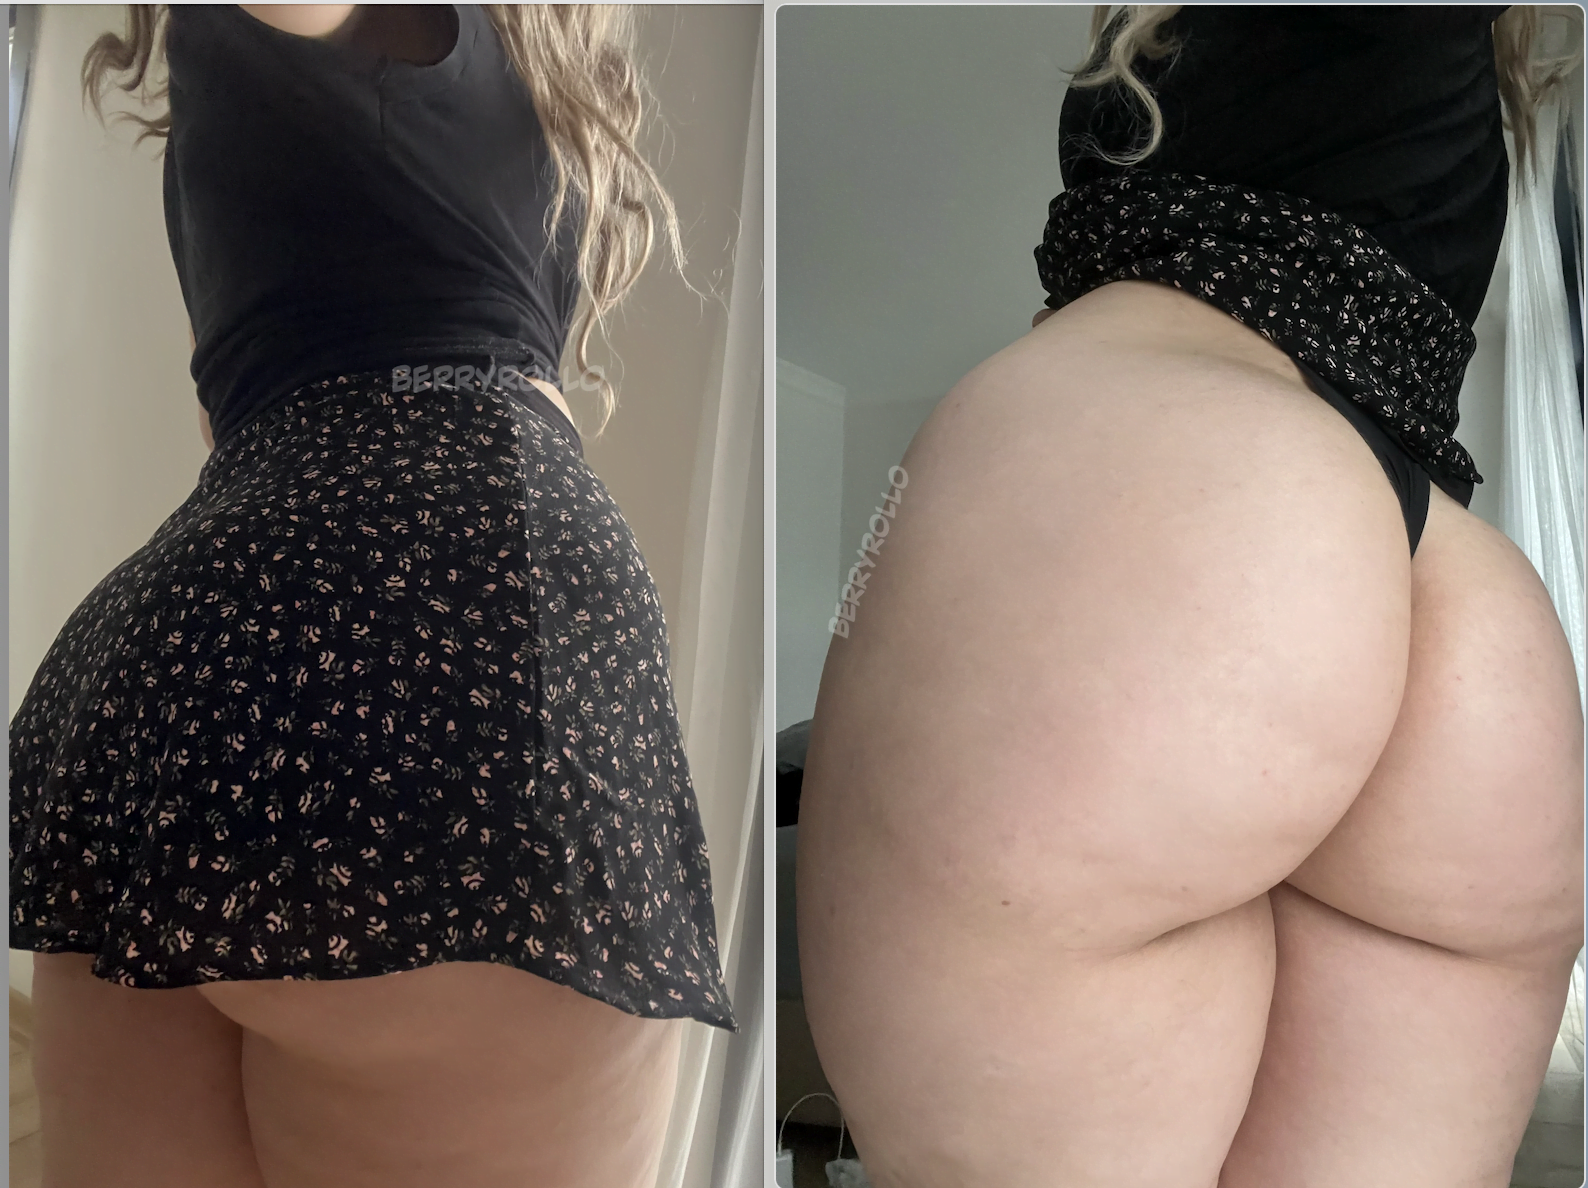 PAWG not sure if i look better on or off